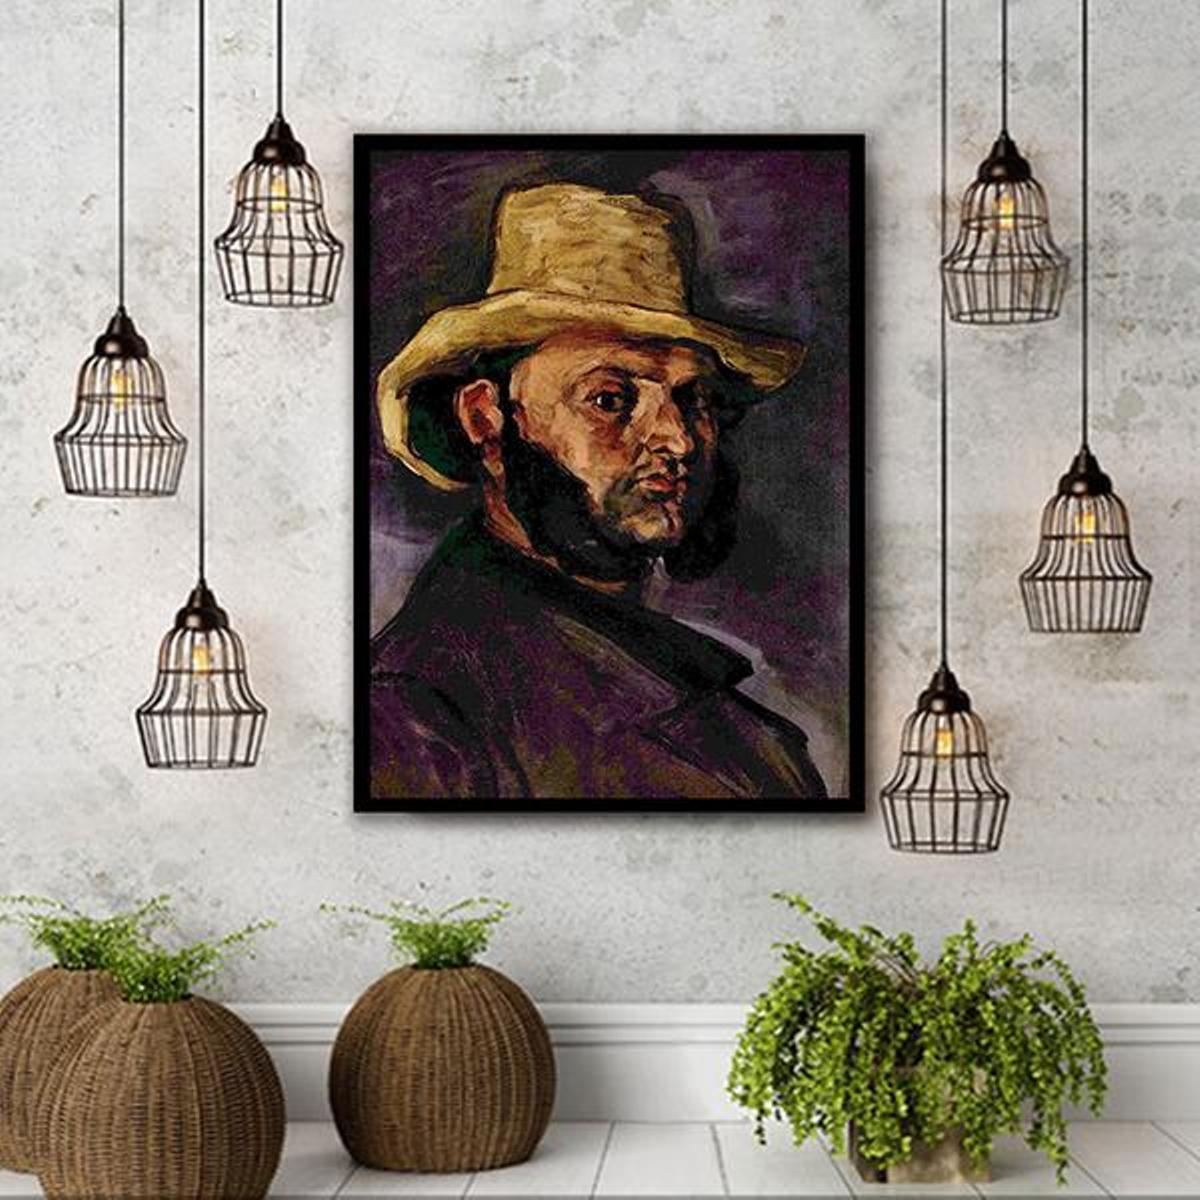 Man in a Straw Hat by Paul Cezanne - Van-Go Paint-By-Number Kit